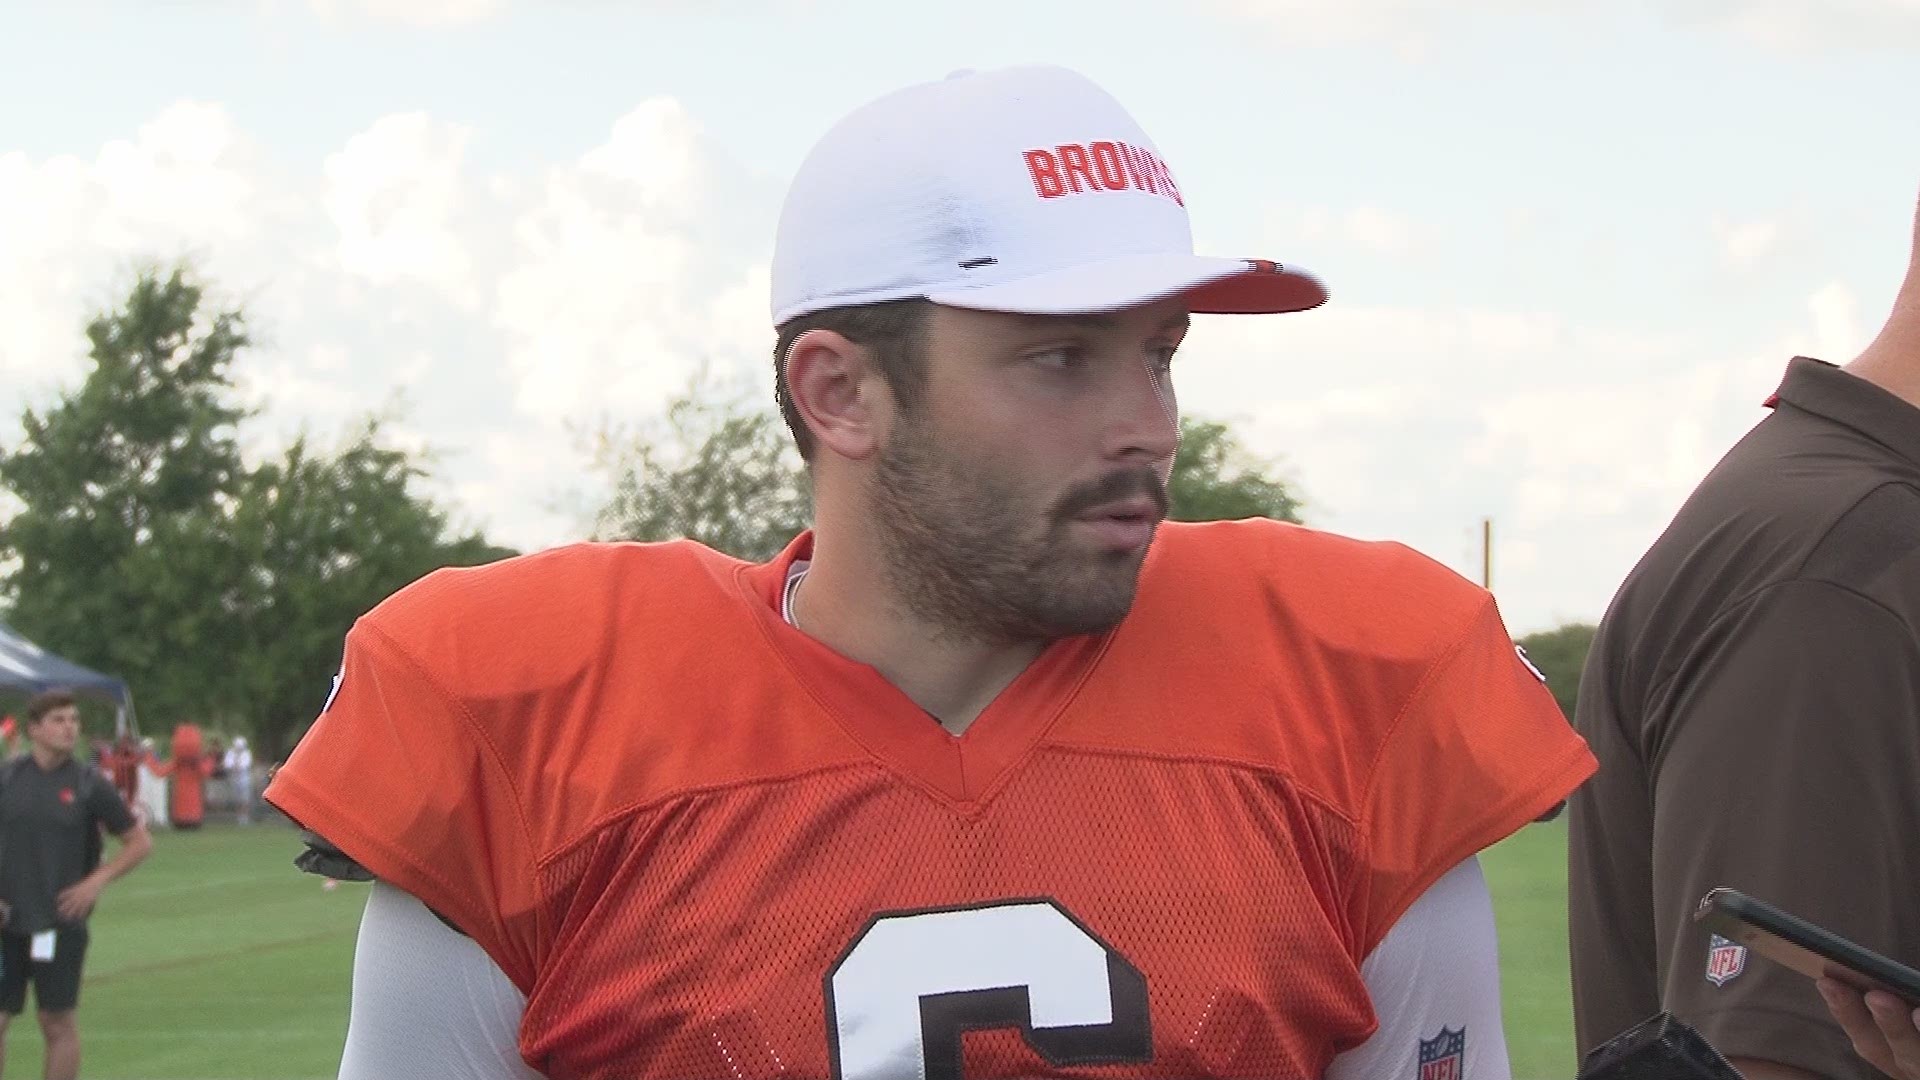 Following the Cleveland Browns' first joint practice with the Indianapolis Colts, quarterback Baker Mayfield said he thinks the Browns have a target on their back this season. The Browns visit the Colts in the second preseason game for both teams on Saturday.